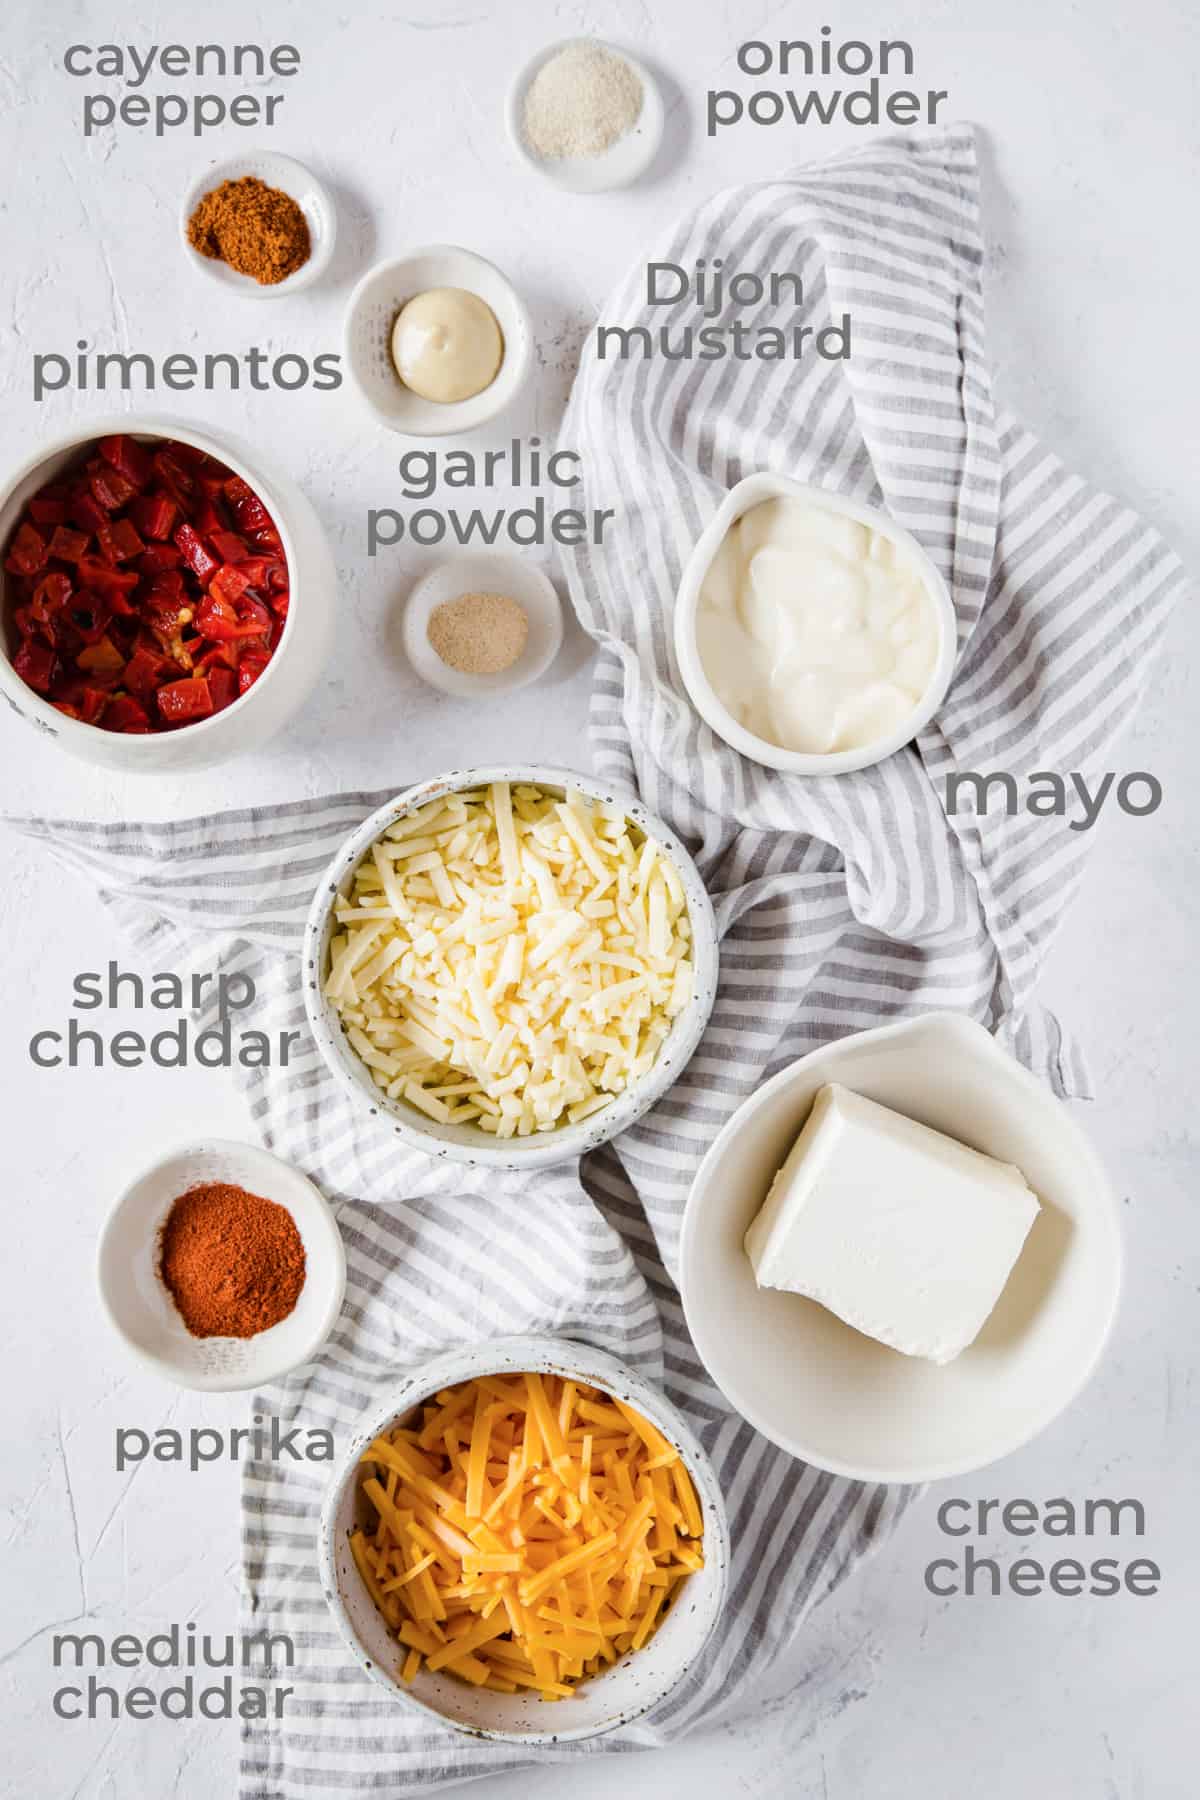 All of the ingredients to make Pimento Cheese Dip: shredded cheddar, shredded sharp cheddar, cream cheese, mayonnaise, cayenne, paprika, garlic powder, onion powder, Dijon mustard, and chopped pimento peppers.